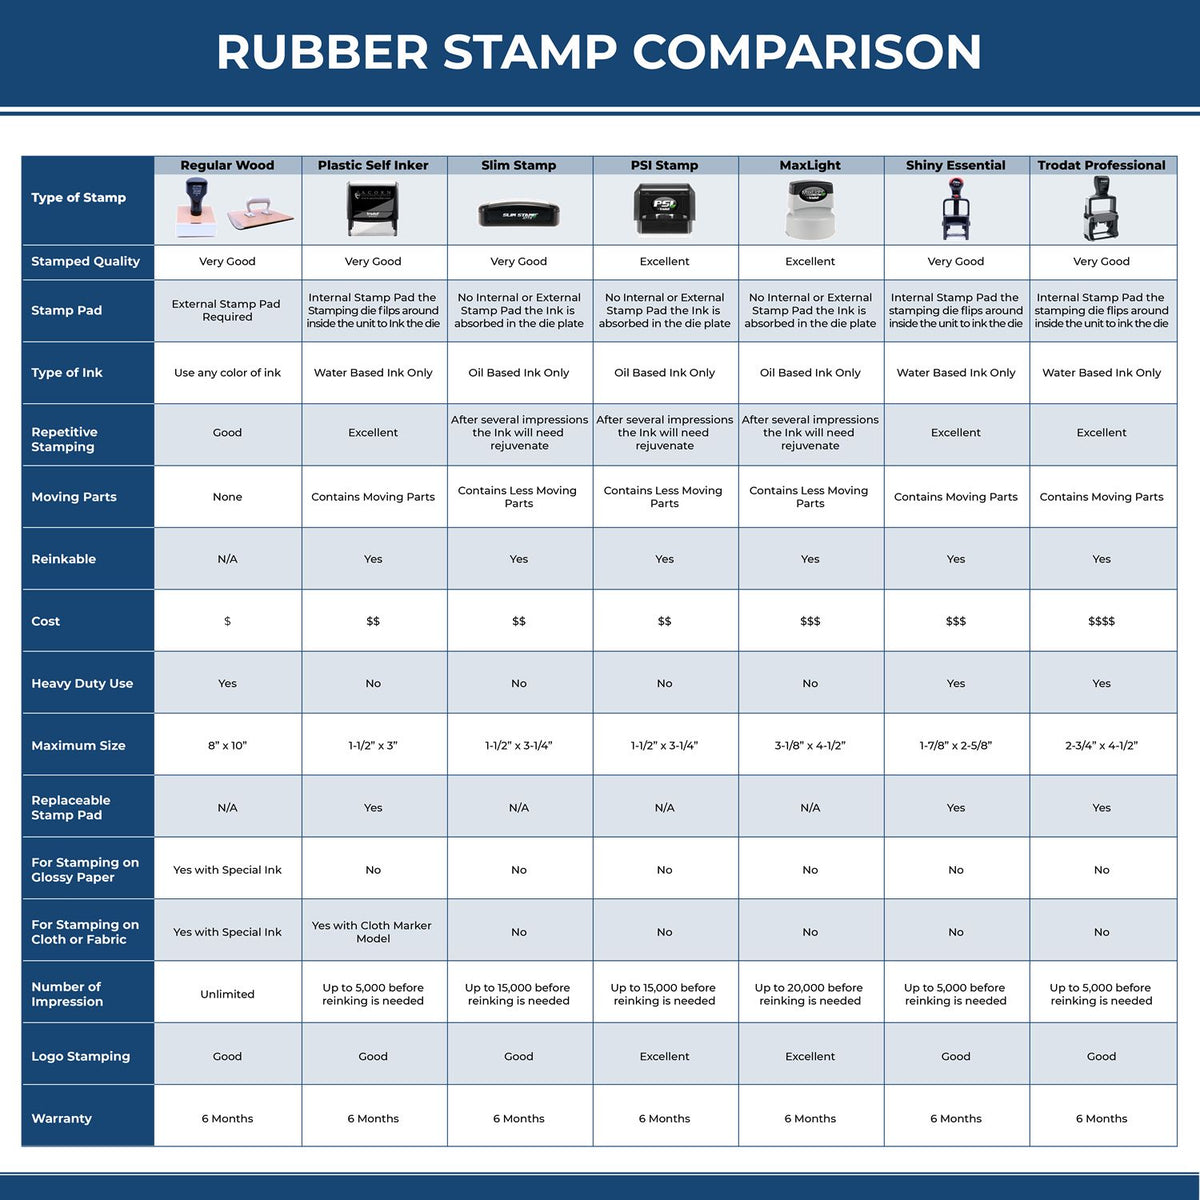 Large Self Inking Confidential Stamp 4113S Rubber Stamp Comparison